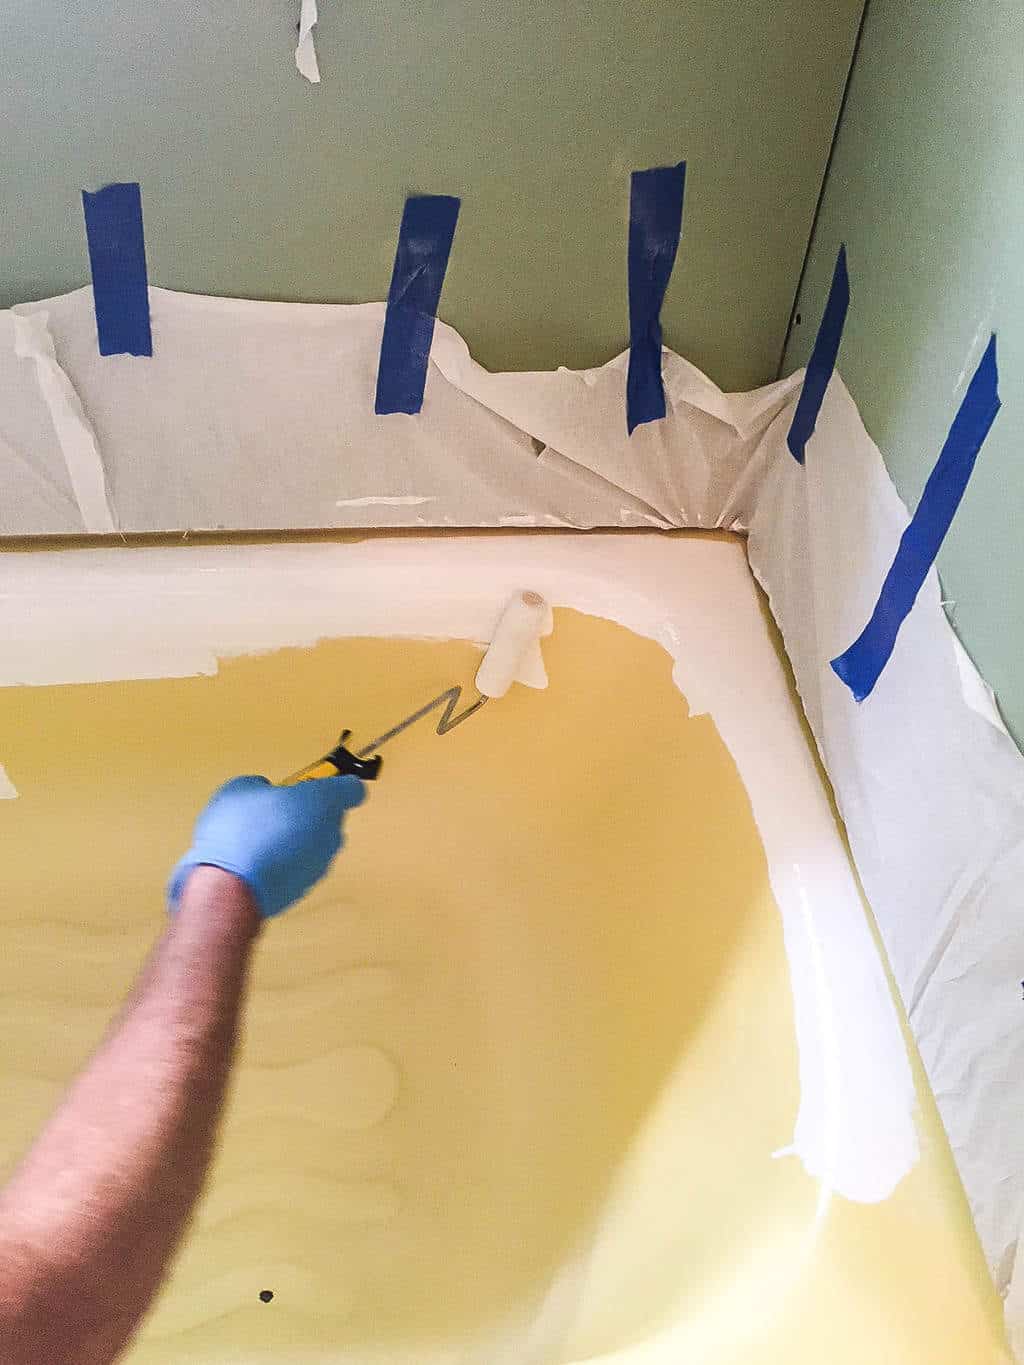 How To Paint A Bathtub Easily & Inexpensively! My